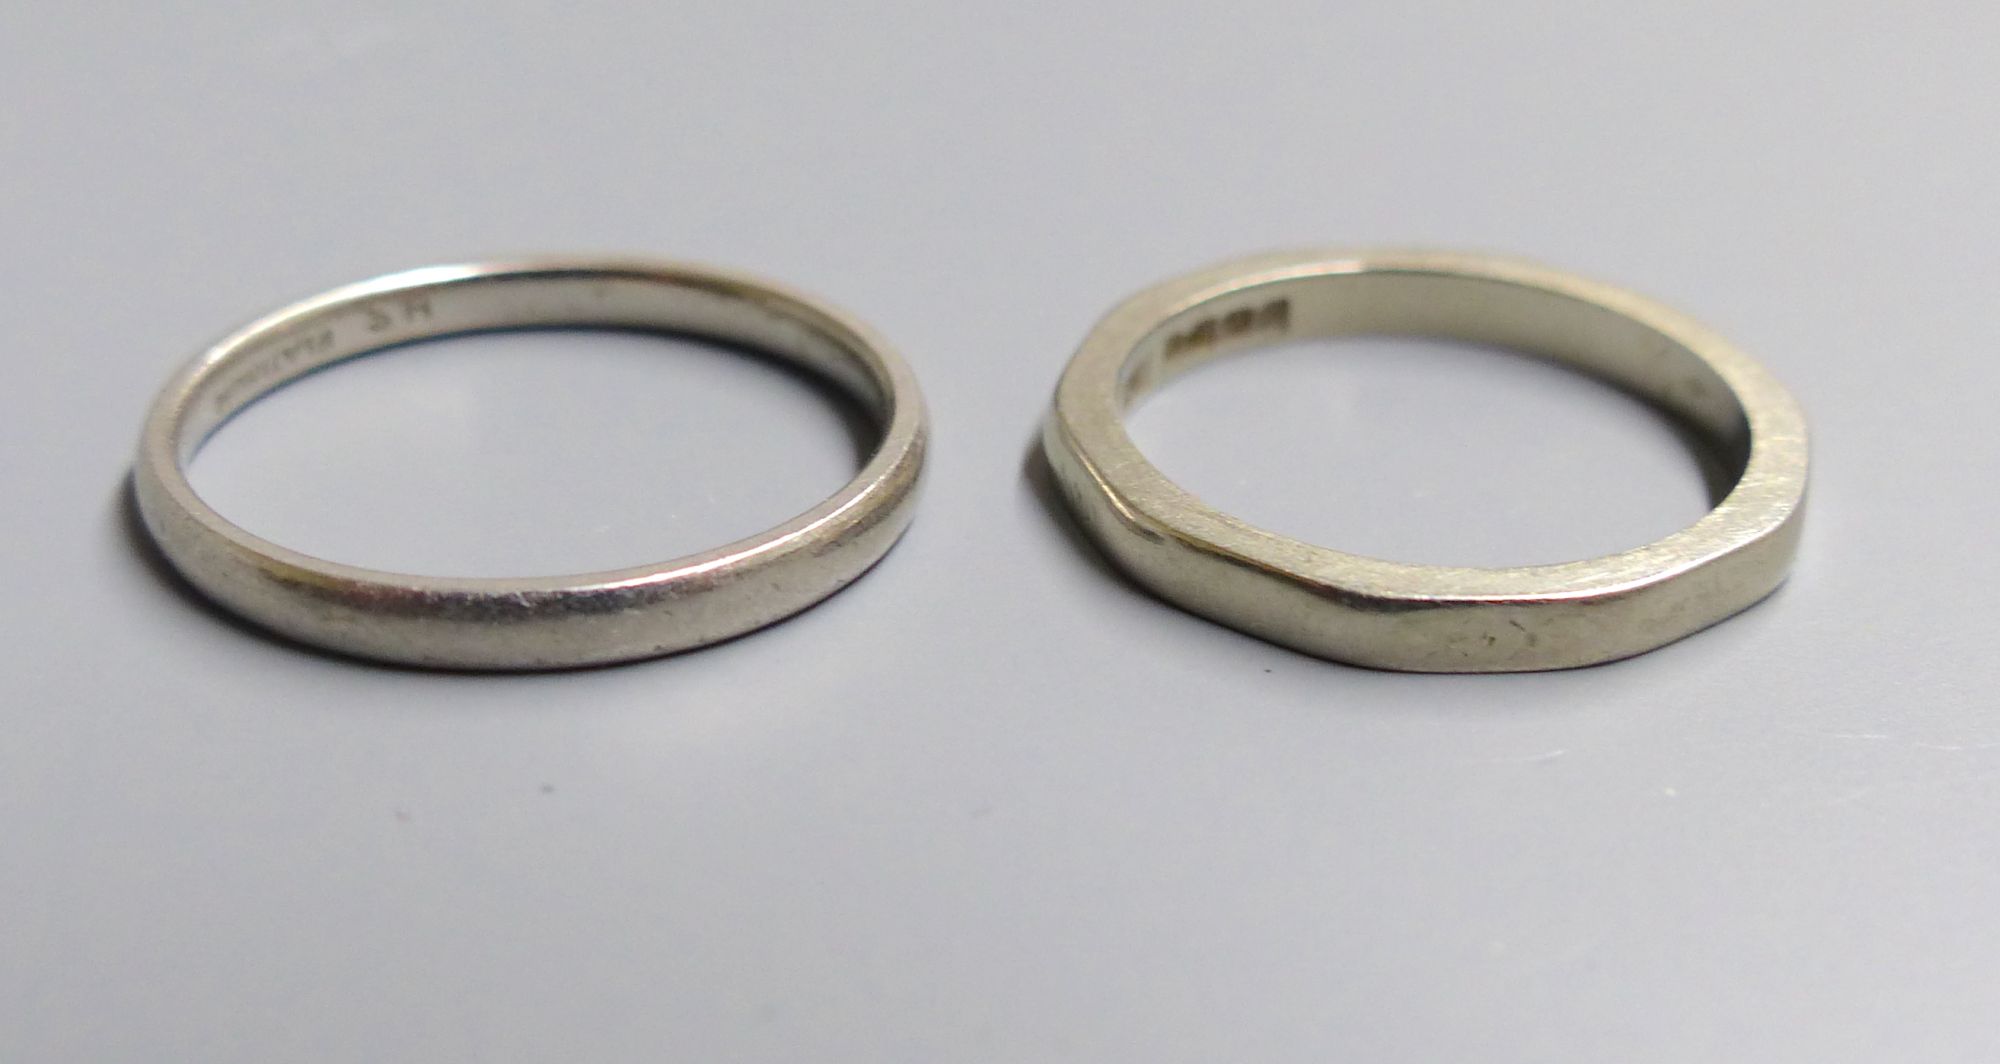 An 18ct gold decagonal wedding band (worn), size K, 2.9 grams and a white metal wedding band stamped Platinum, size M, 2.7 grams.